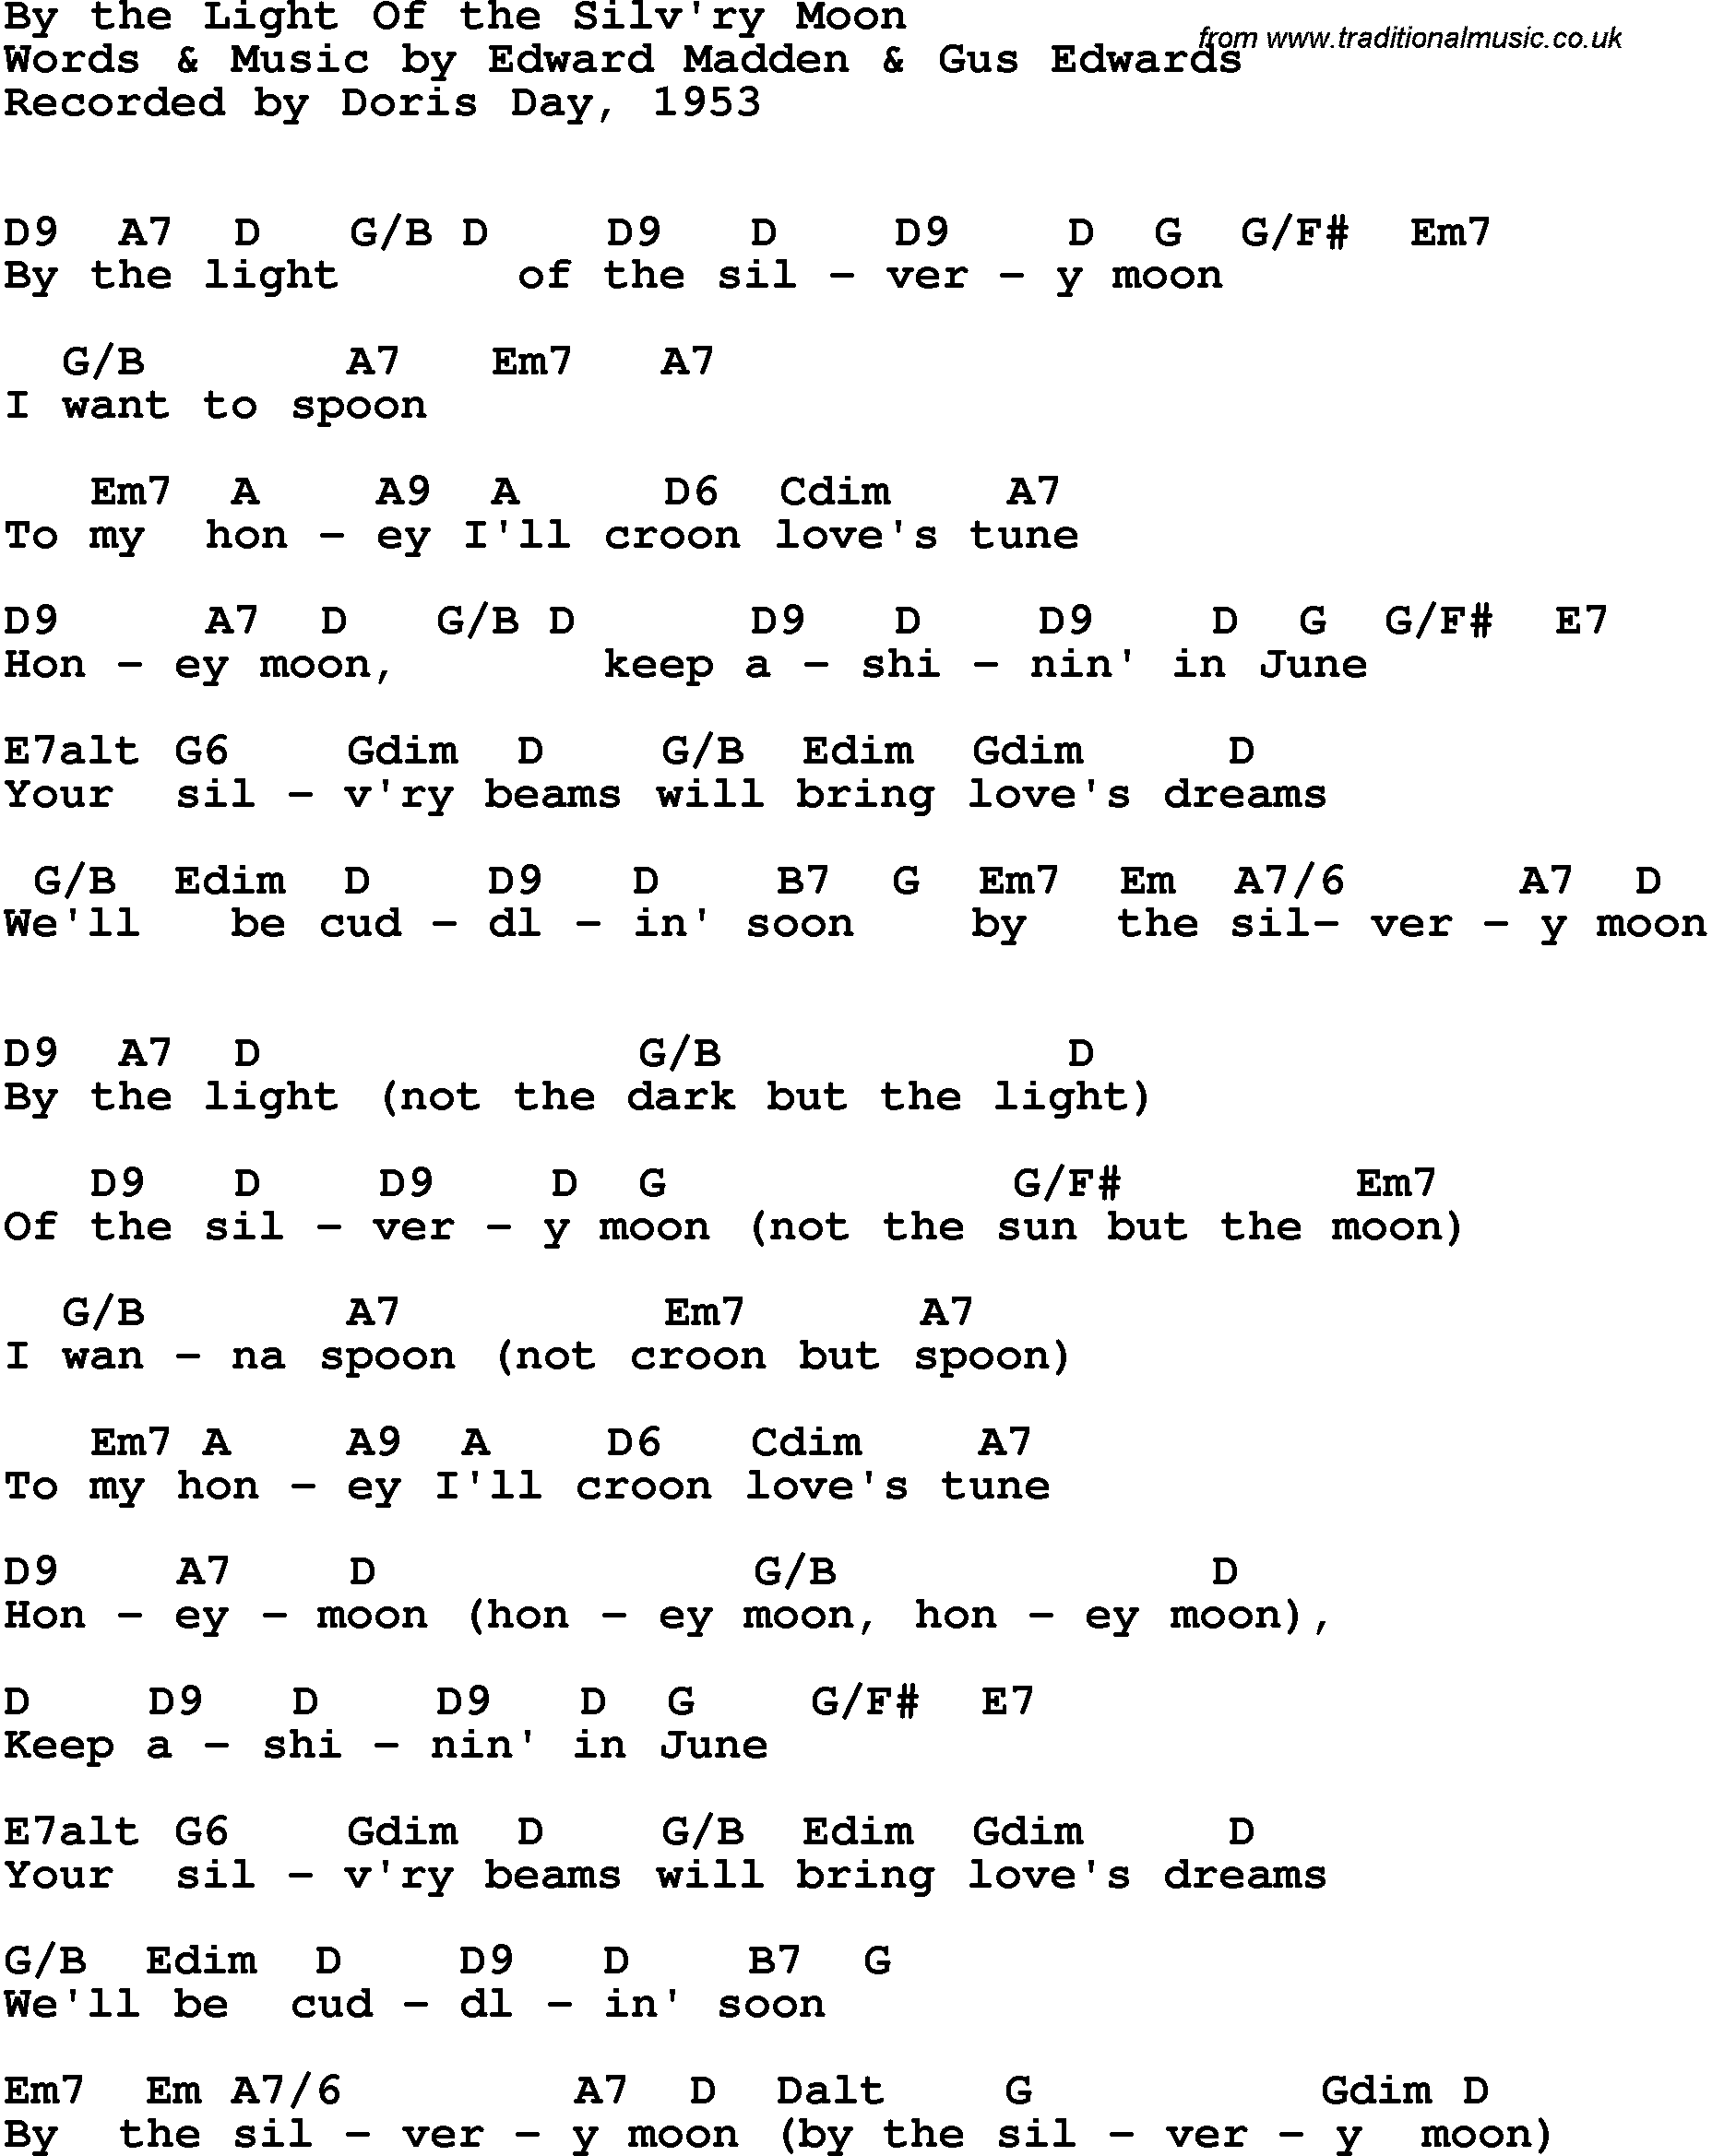 Song Lyrics with guitar chords for By The Light Of The Silvery Moon - Doris Day, 1953